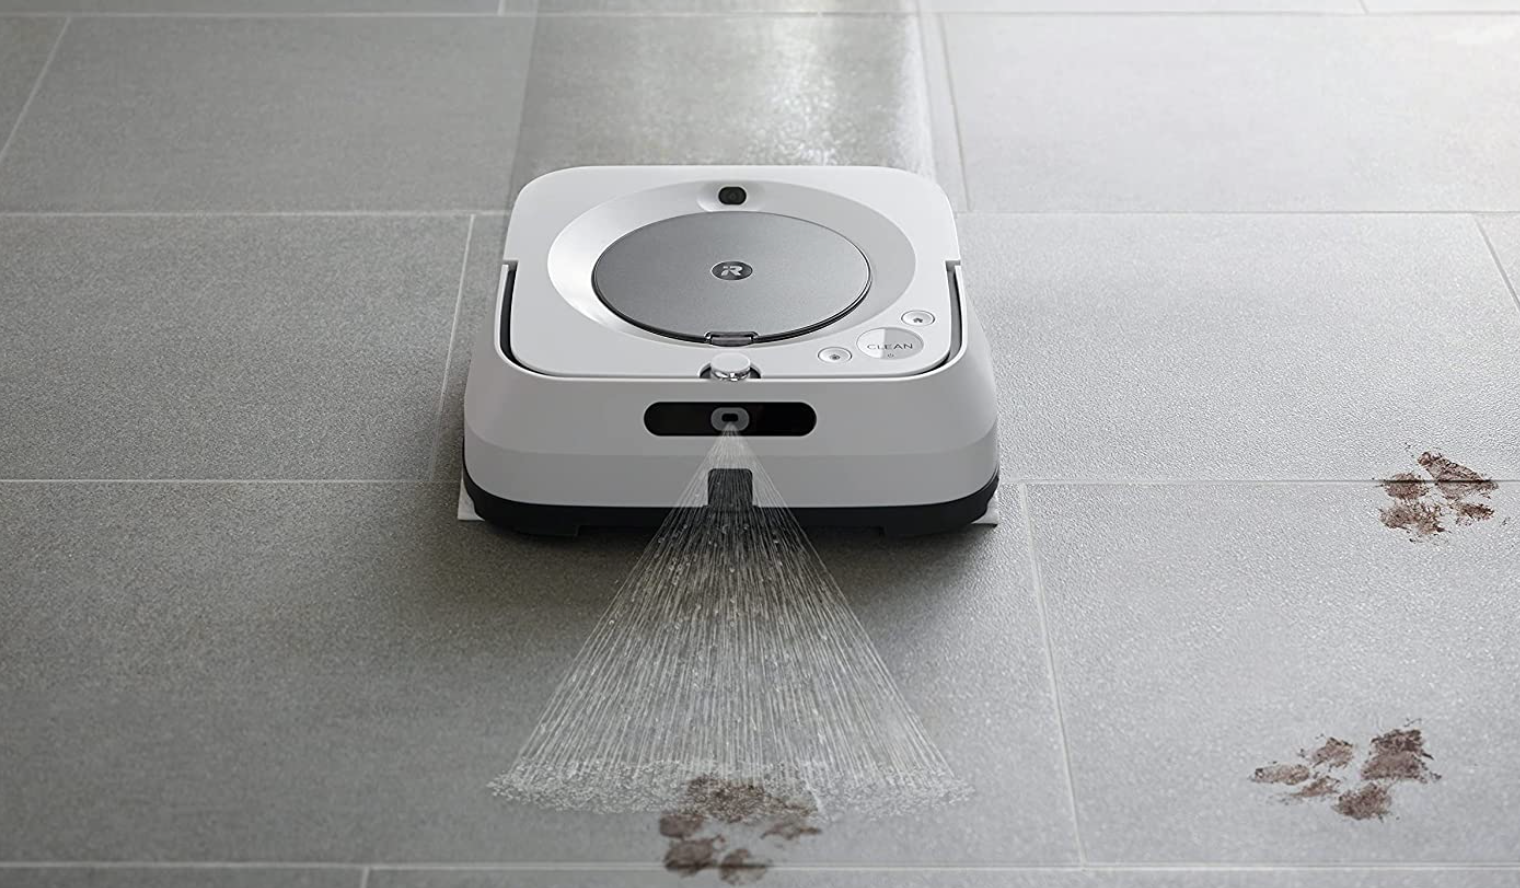 The iRobot vacuum spraying a cleaner on a floor covered in muddy prints